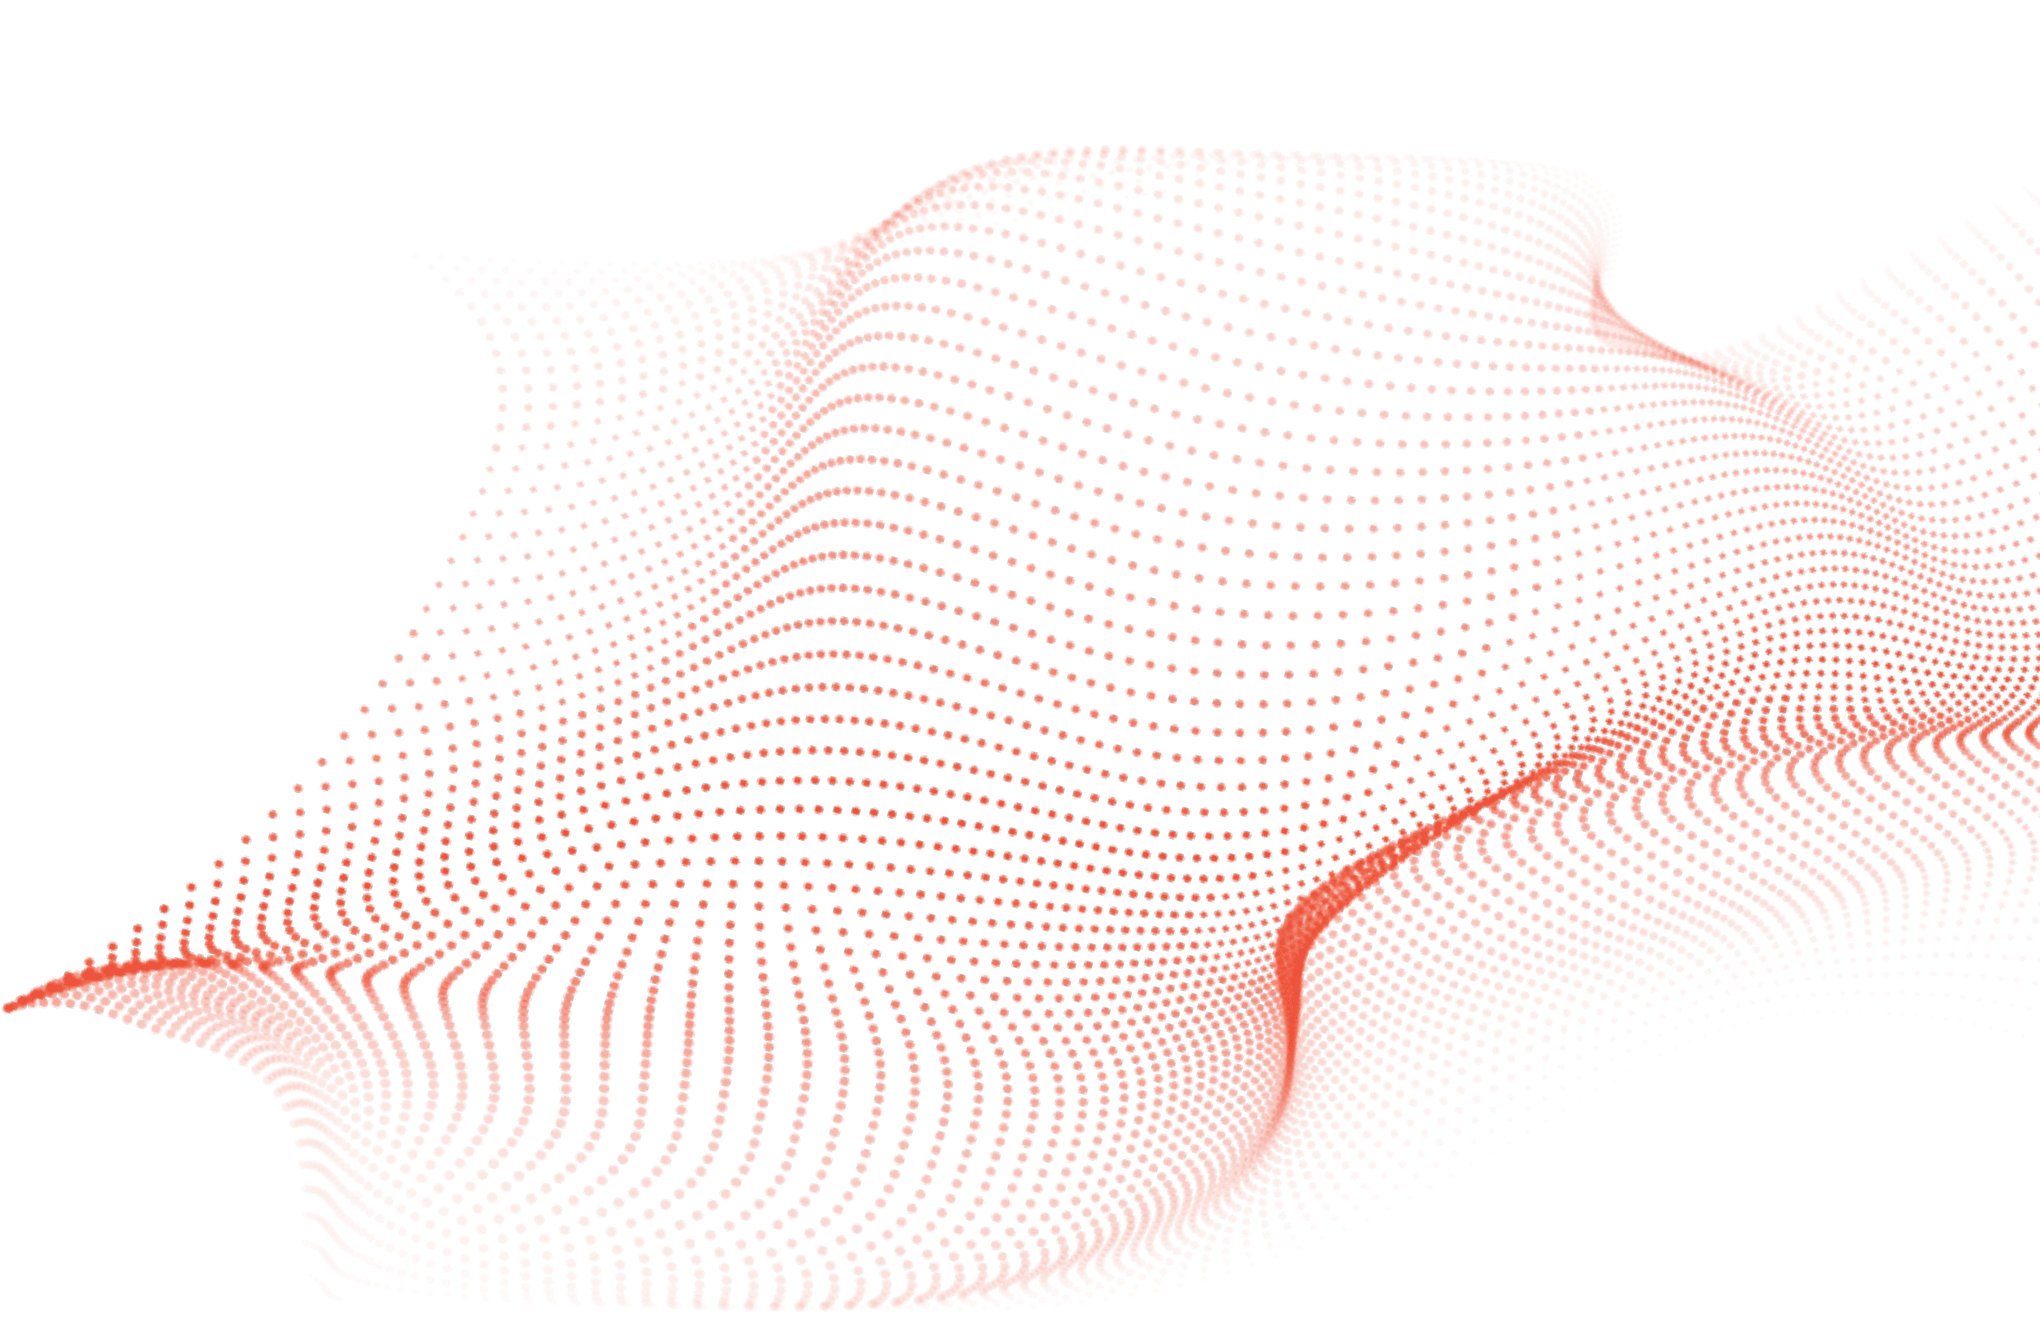 Digital graphic of a red waveform pattern composed of dots on a green background, symbolizing sound frequency or data flow visualization